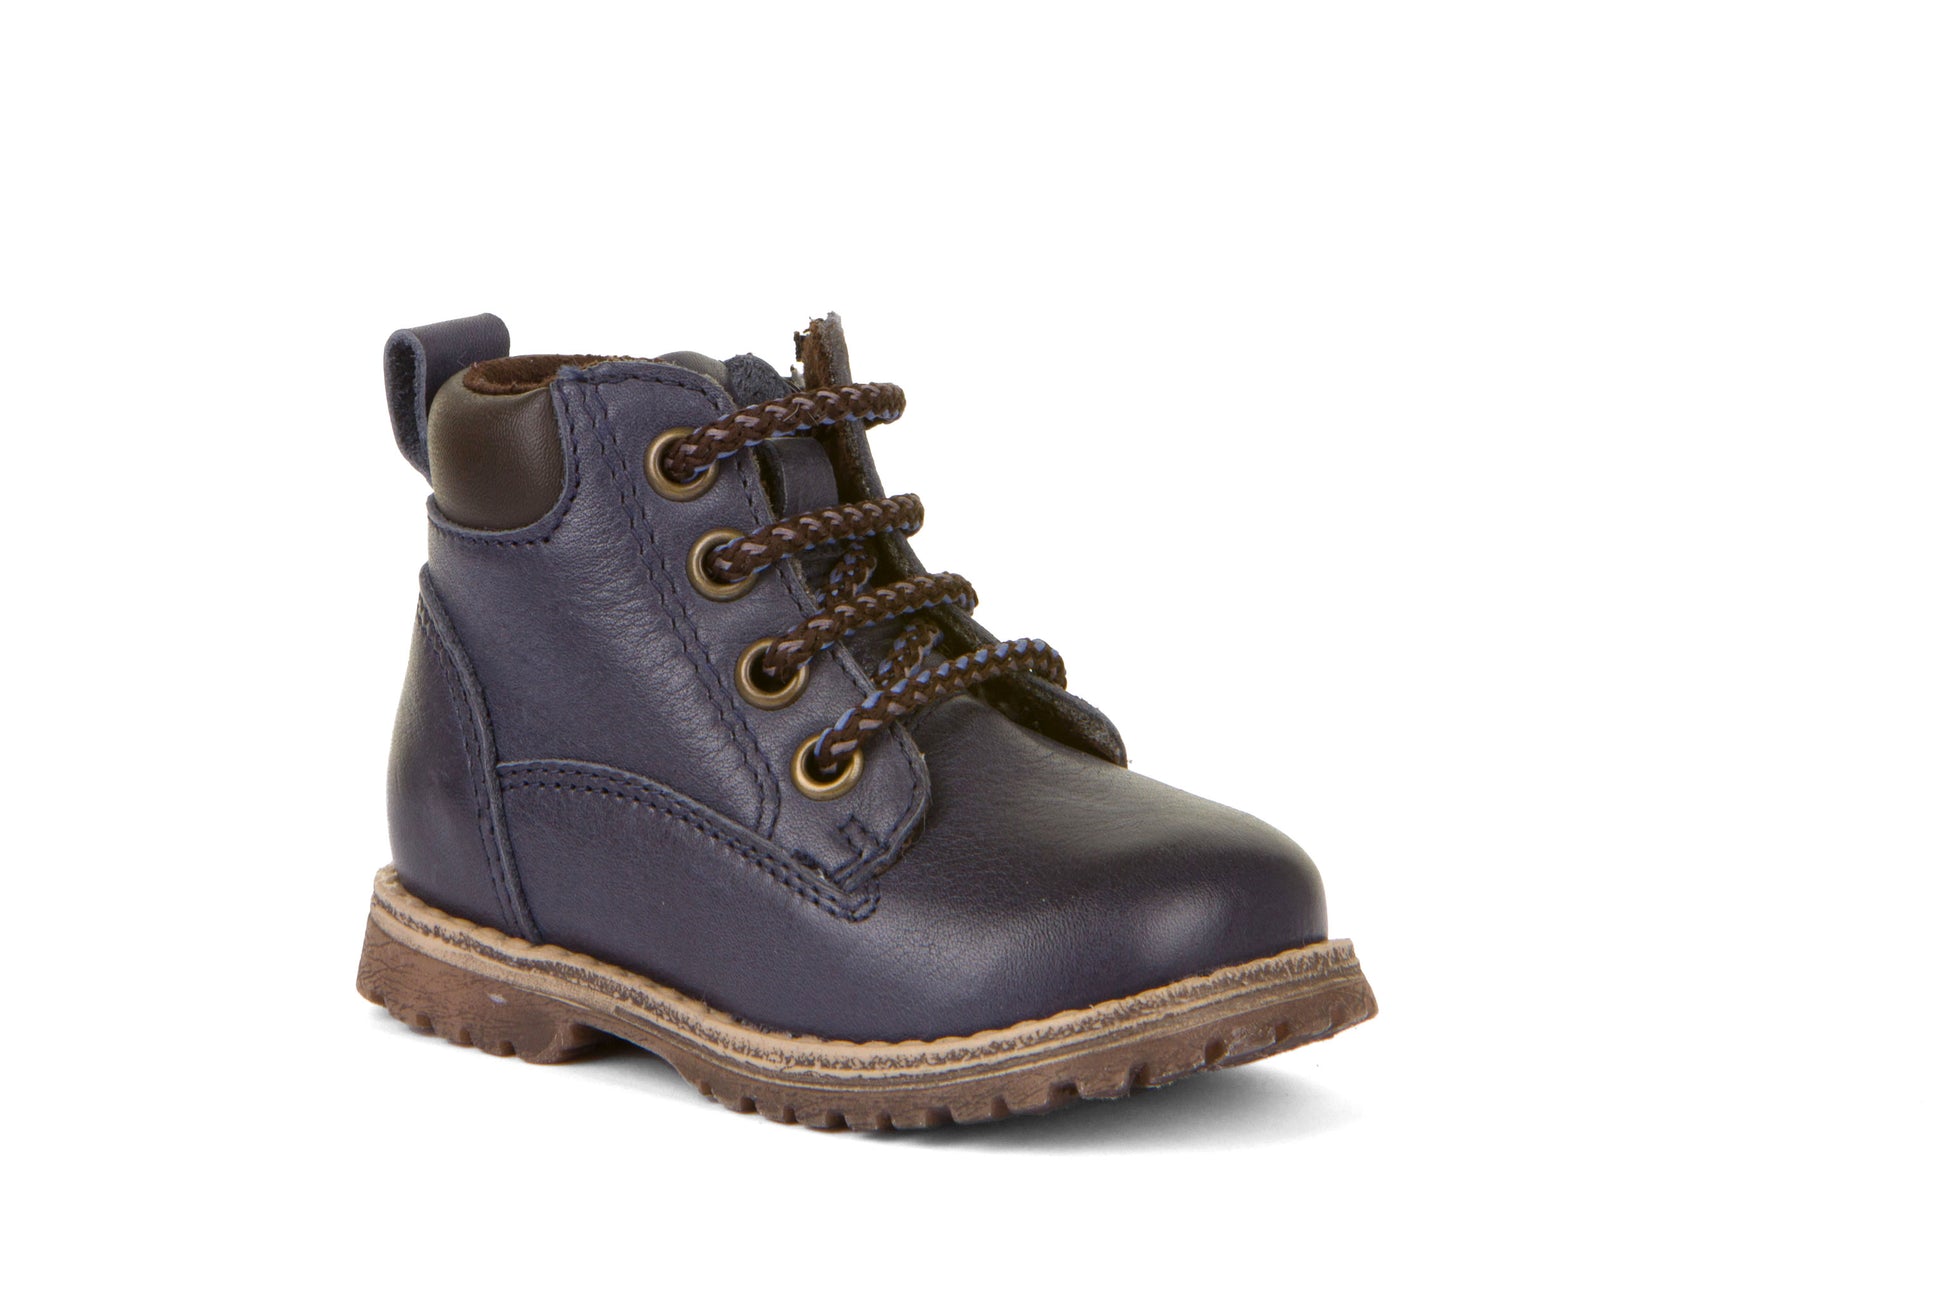 A boys boot by Froddo, style Mono  G2110108-2 in Navy with lace, zip fastening. Right front sideview.